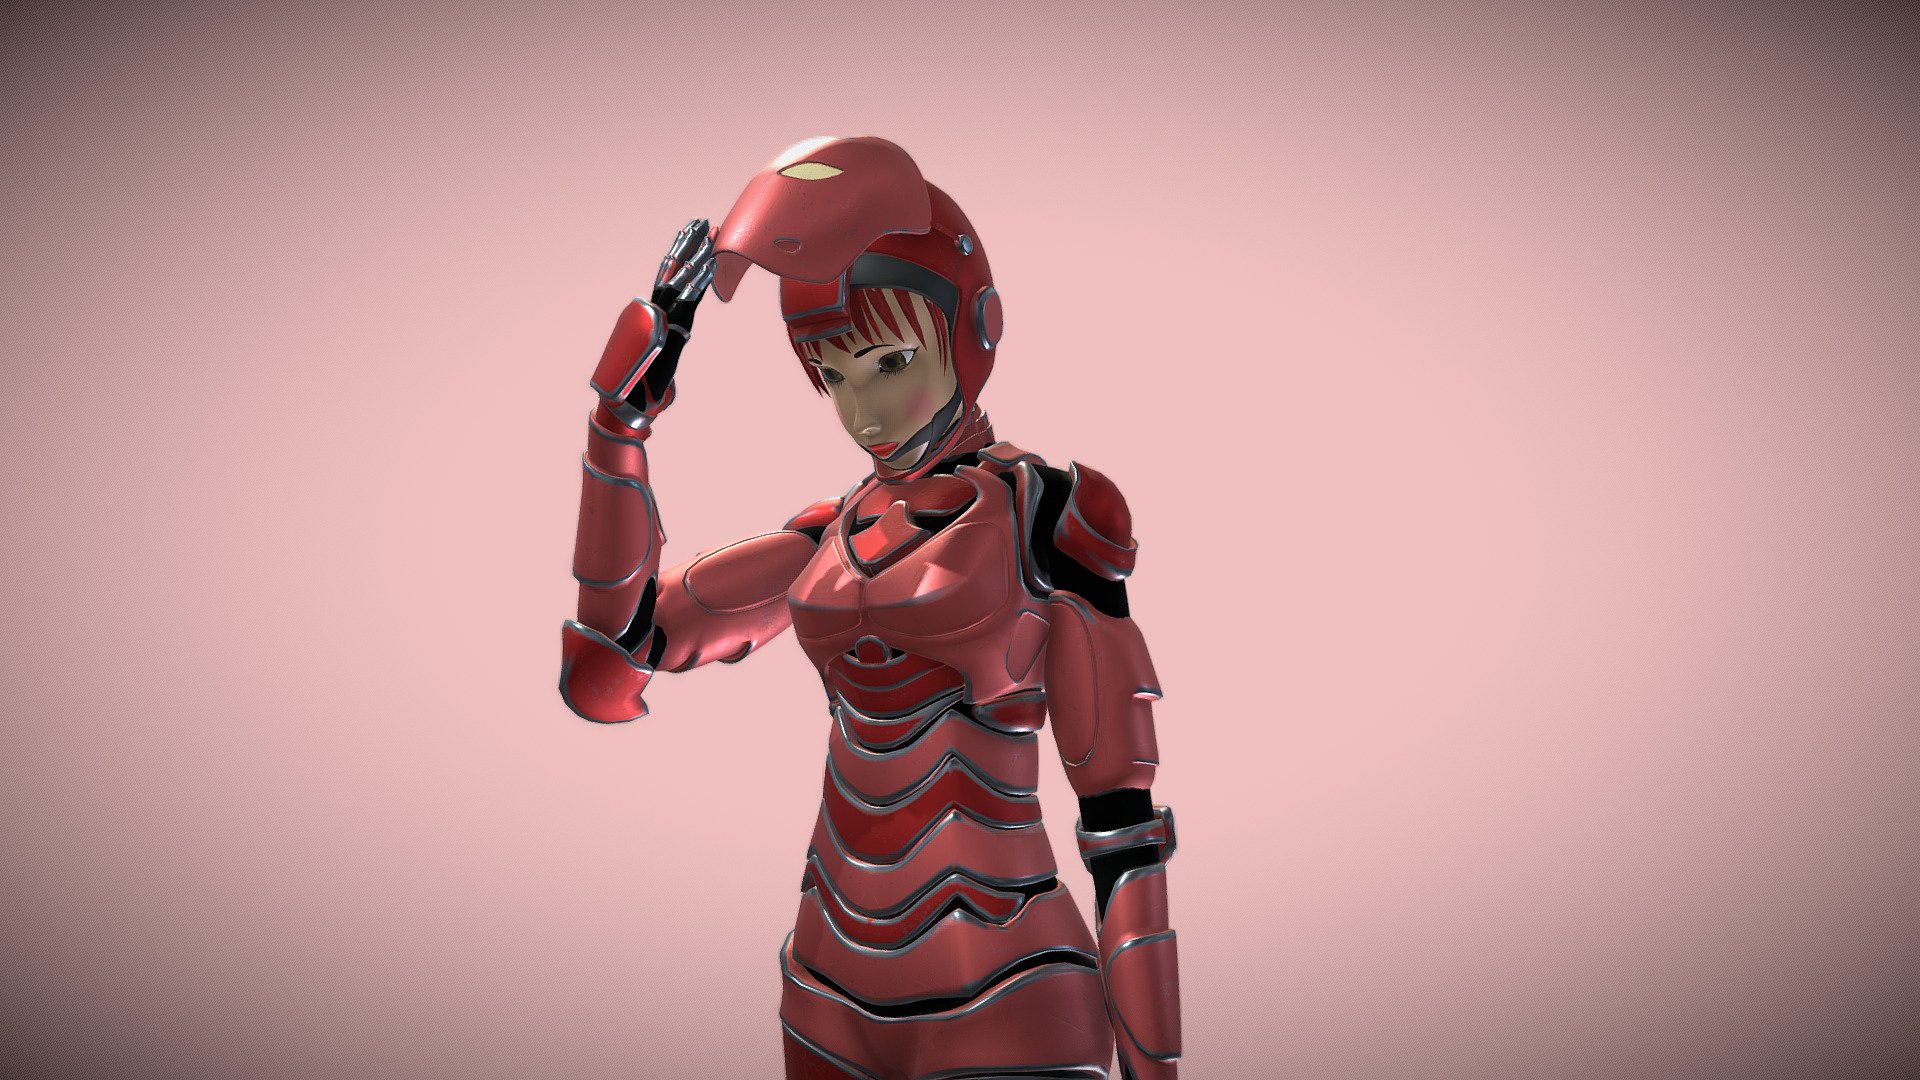 Red - Iron Suit Girl
One of a Kind!
Rigged - animation Cycle included.
UV Unwrapped and textured. 
Comes with textures at 4096x4096 resolution. 

The model contains 9 objects, 6 sets of material, and 5 sets of textures. 
Modeled in Blender, painted in Substance Painter. 

Blend file before modifiers has 15.197 Faces, and 16.158 Vertices.

My Gallery: https://edjan3d.wixsite.com/my-site - Red - Iron Suit Girl - Buy Royalty Free 3D model by Ed (@Ed3D.Blend) 3d model